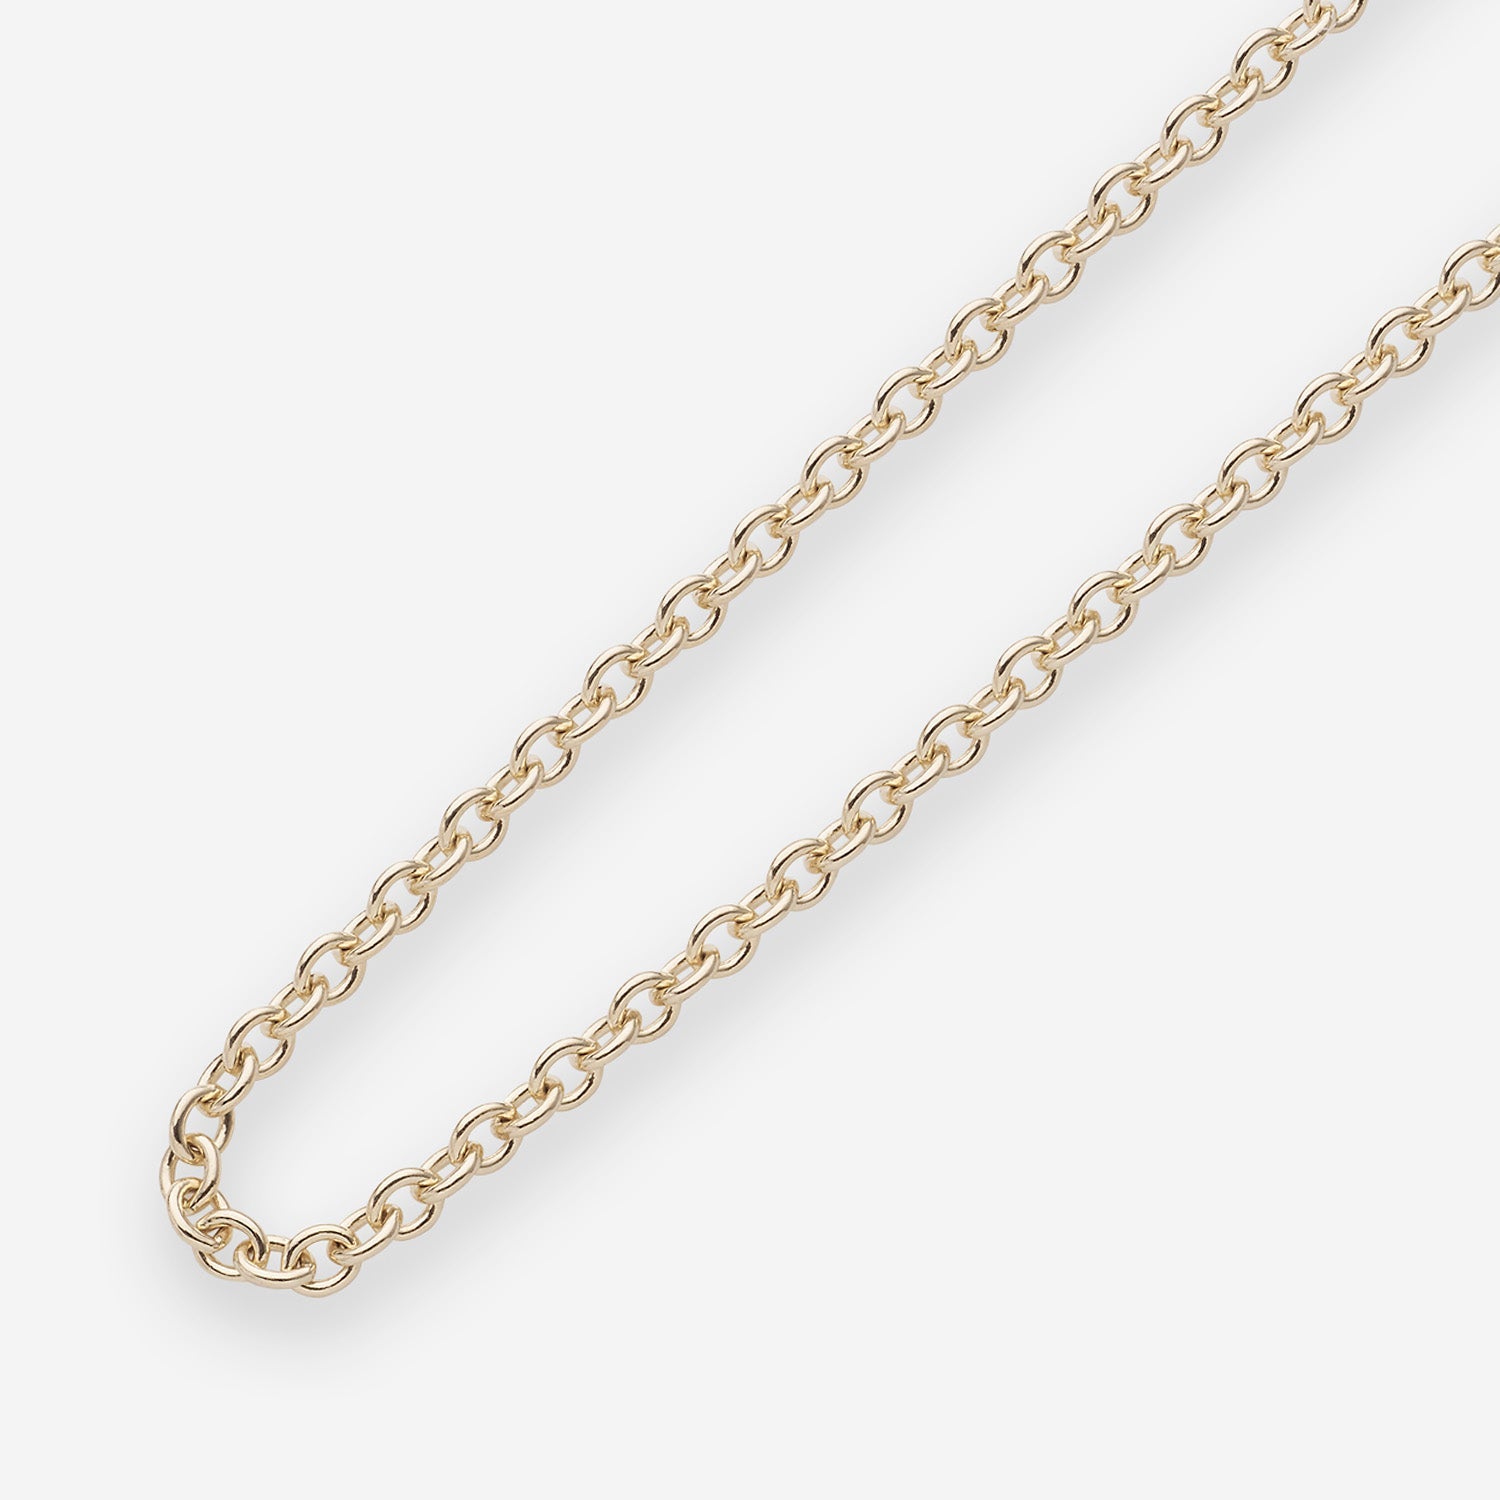 886 Royal Mint Necklaces 886 Trace Chain in 9ct Yellow Gold